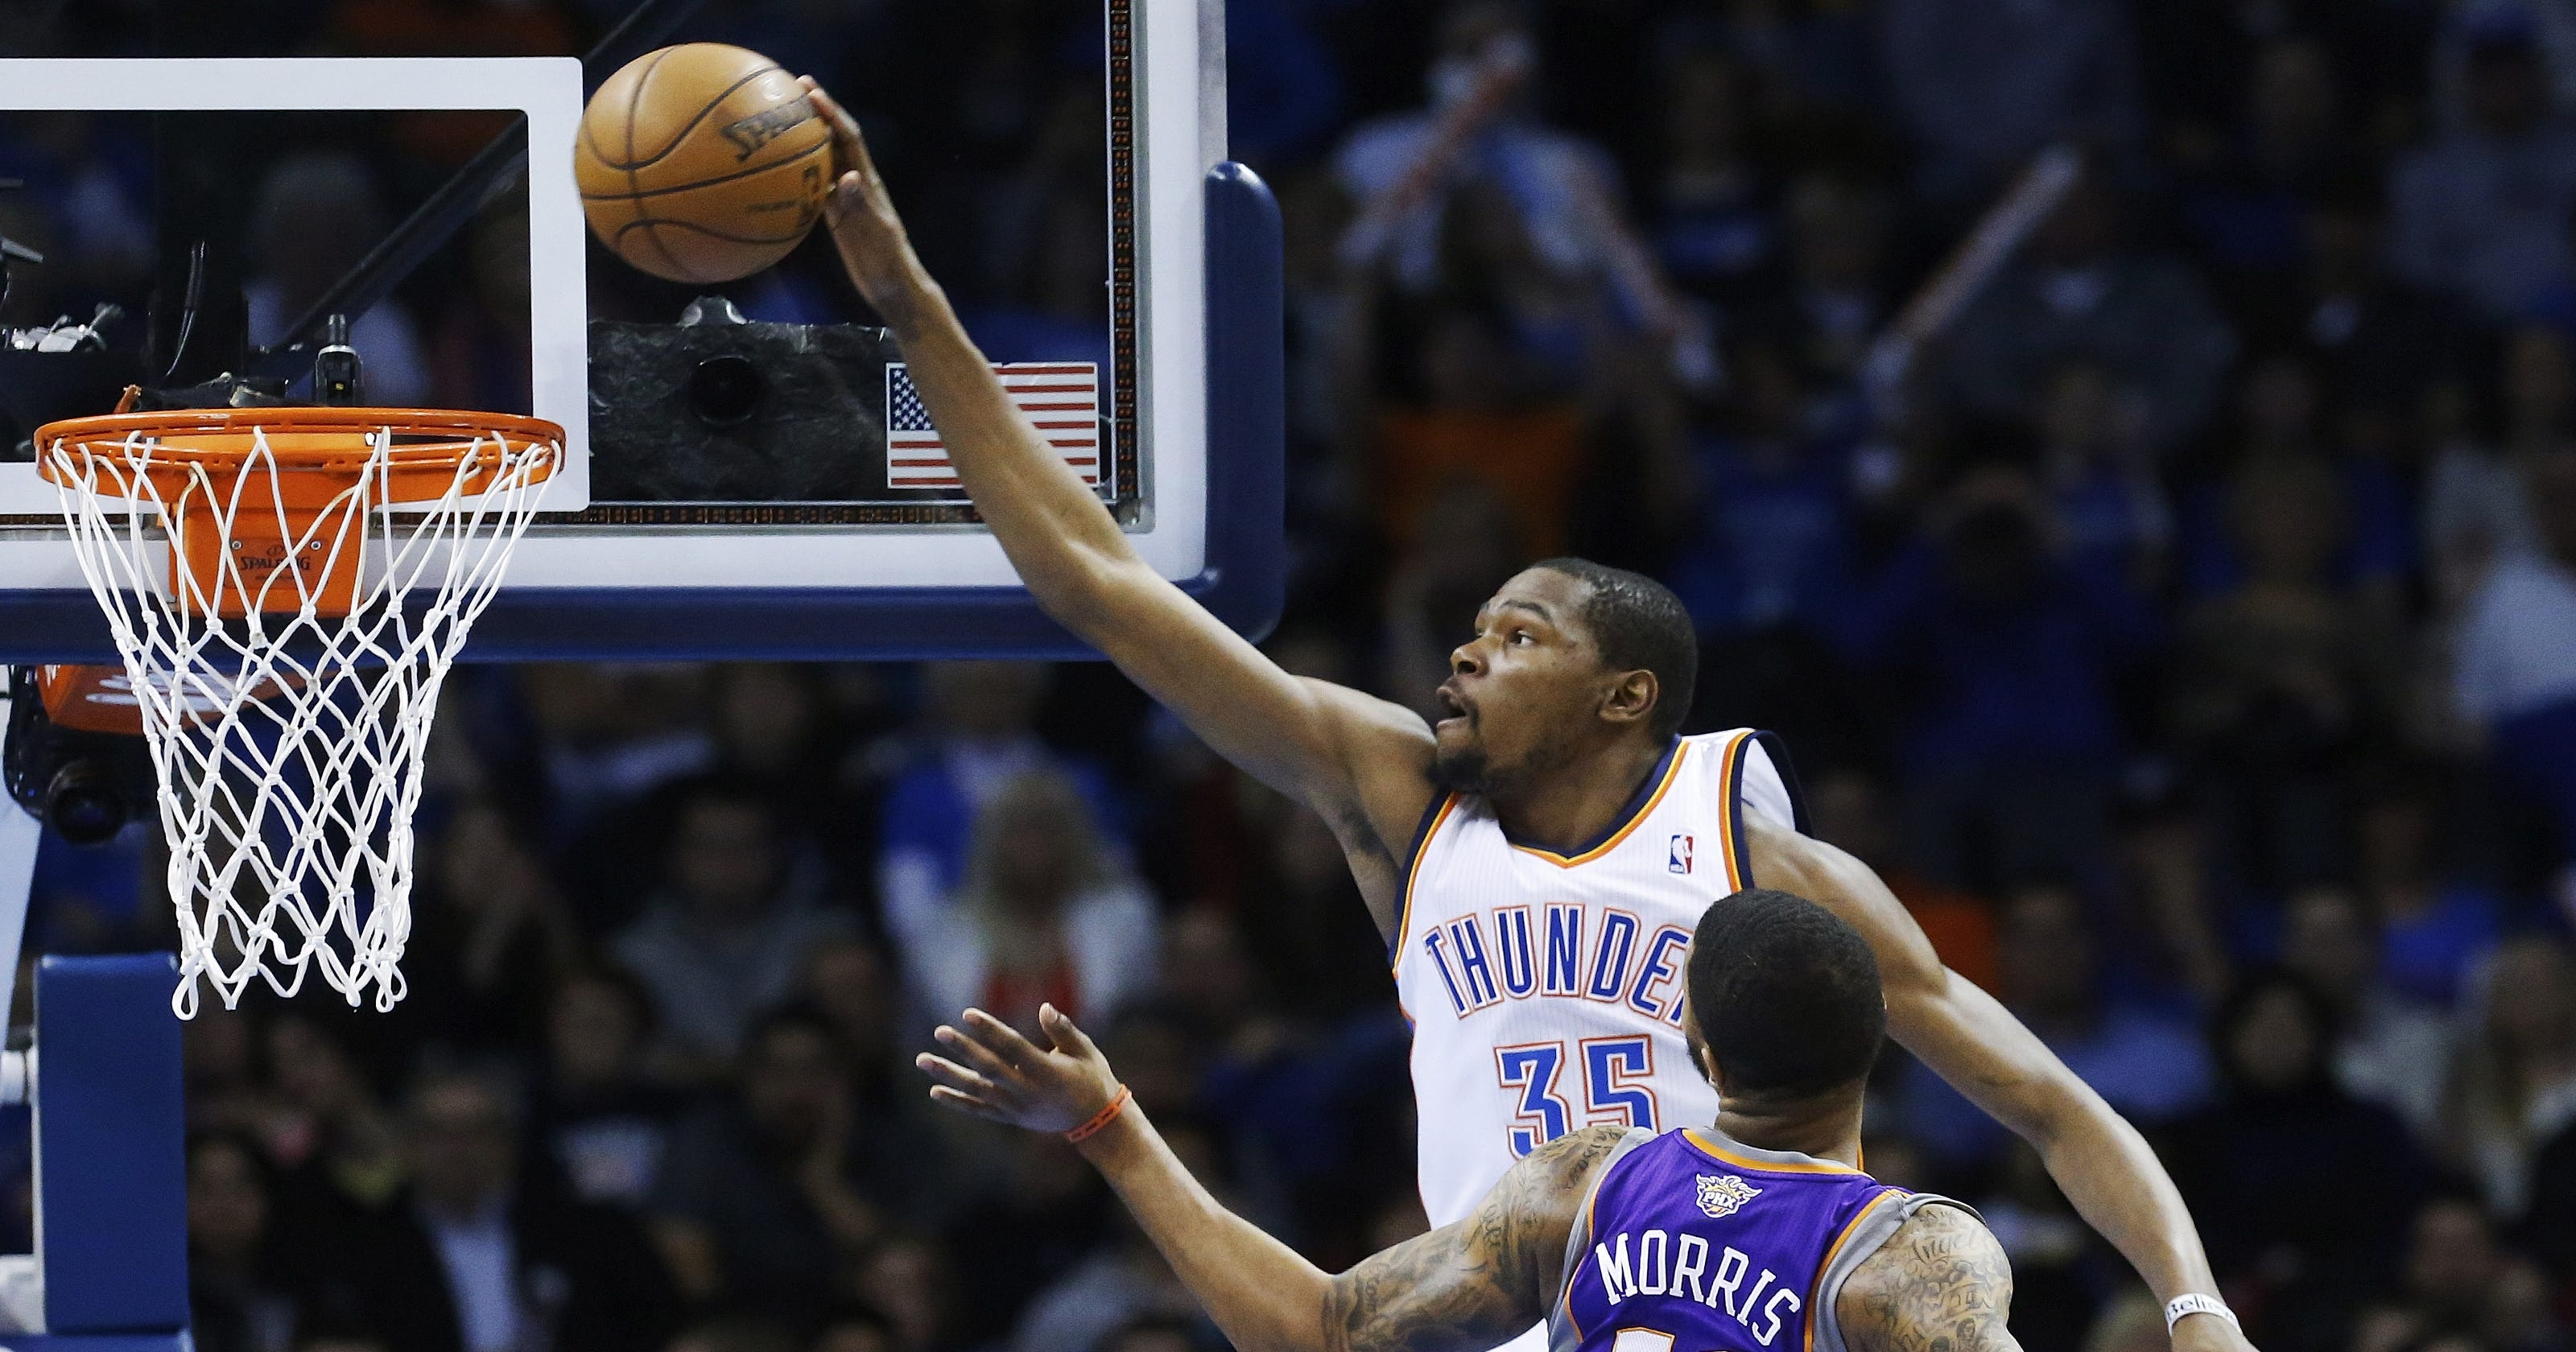 Kevin Durant unleashes awesome dunk on Suns (VIDEO)